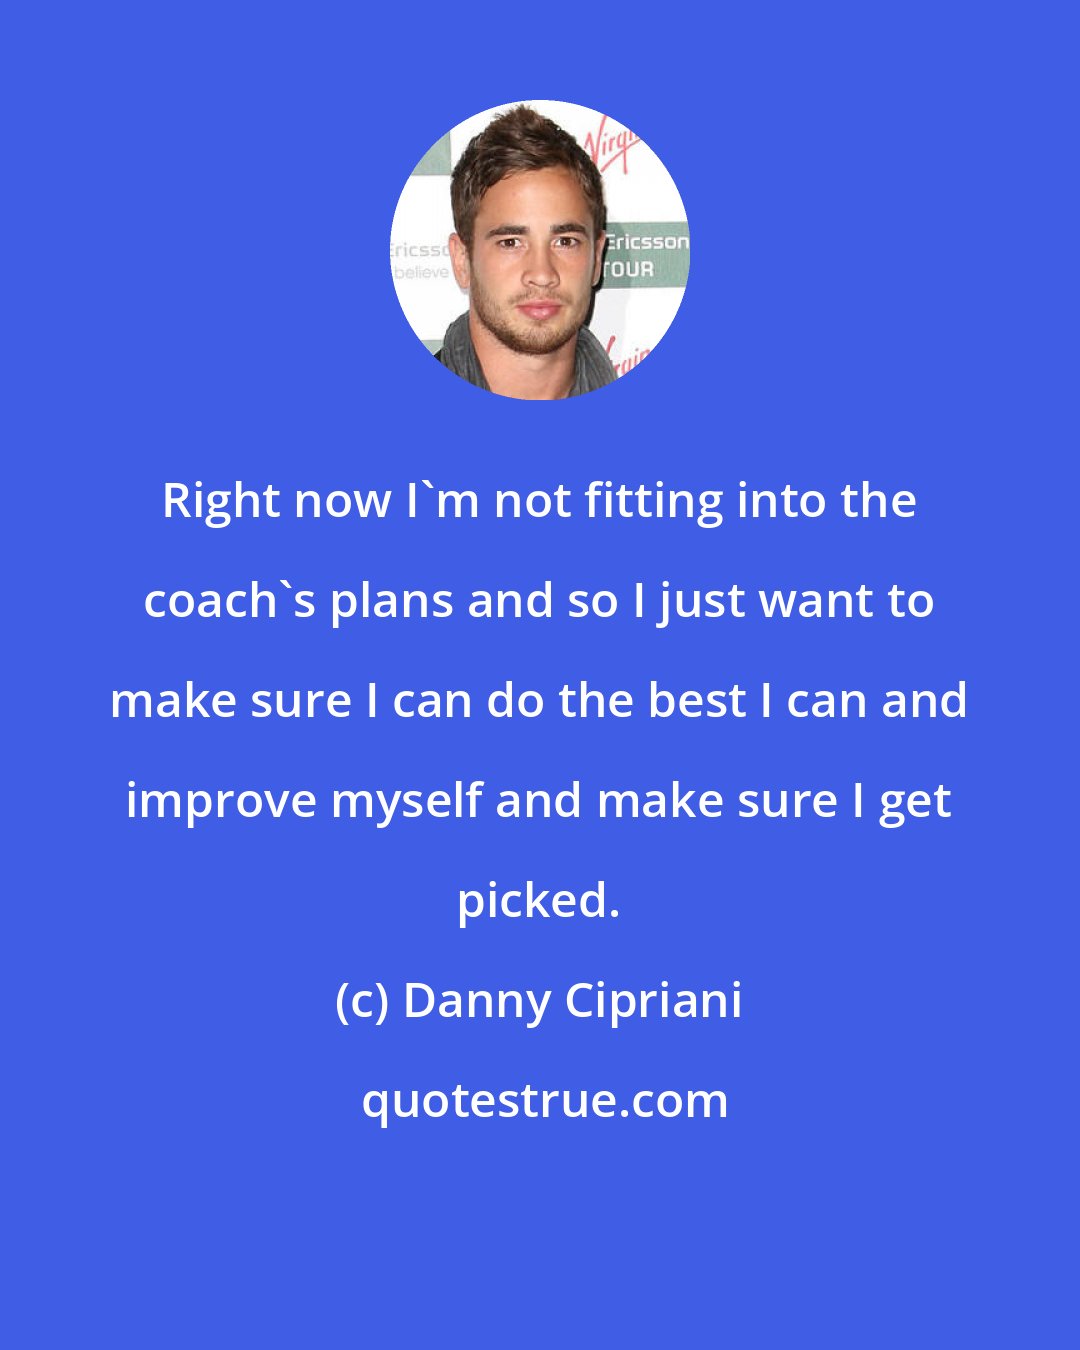 Danny Cipriani: Right now I'm not fitting into the coach's plans and so I just want to make sure I can do the best I can and improve myself and make sure I get picked.